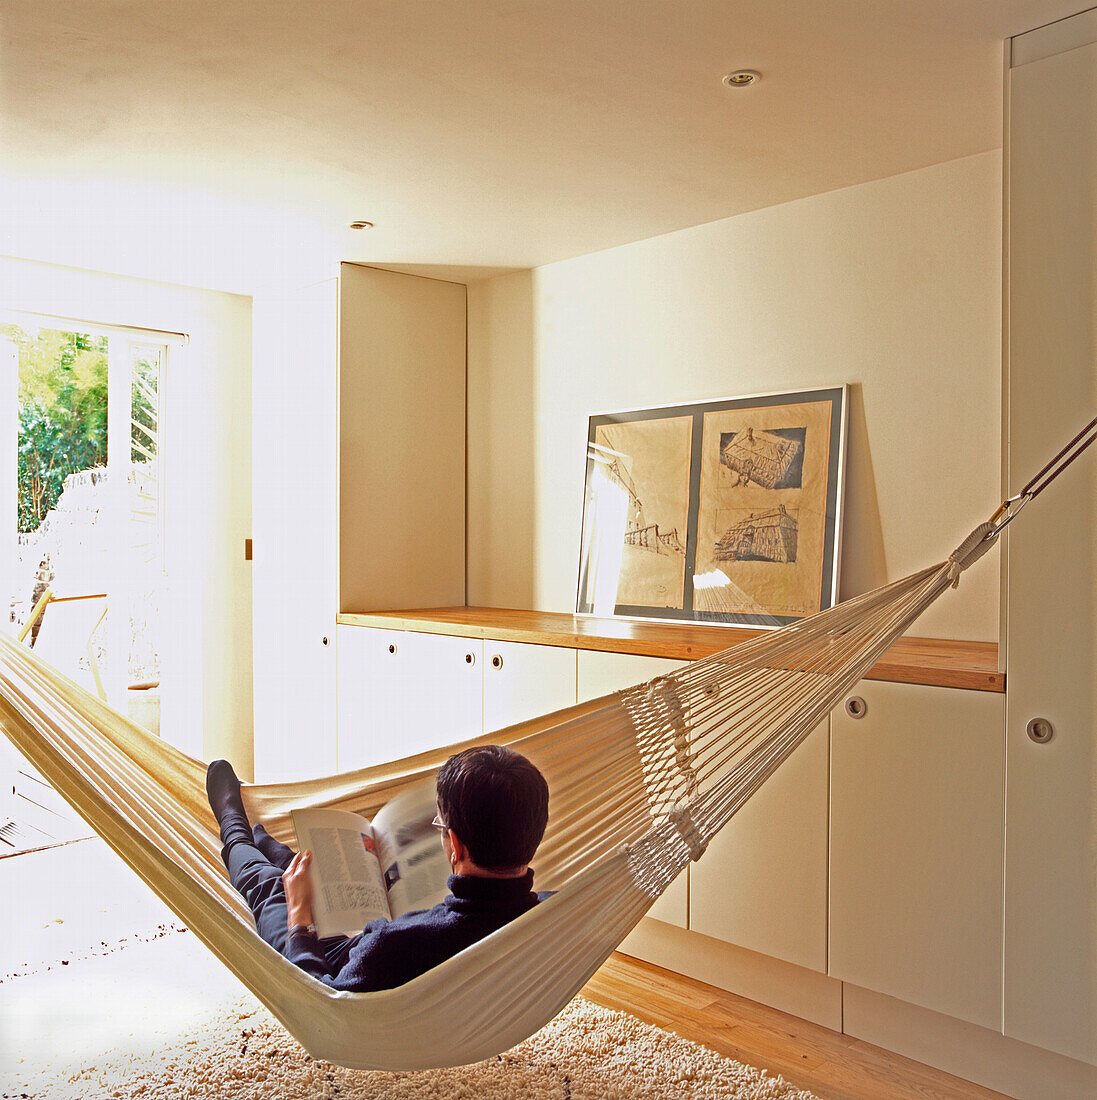 Man reading in white cotton hammock in lobby area with storage cupboards